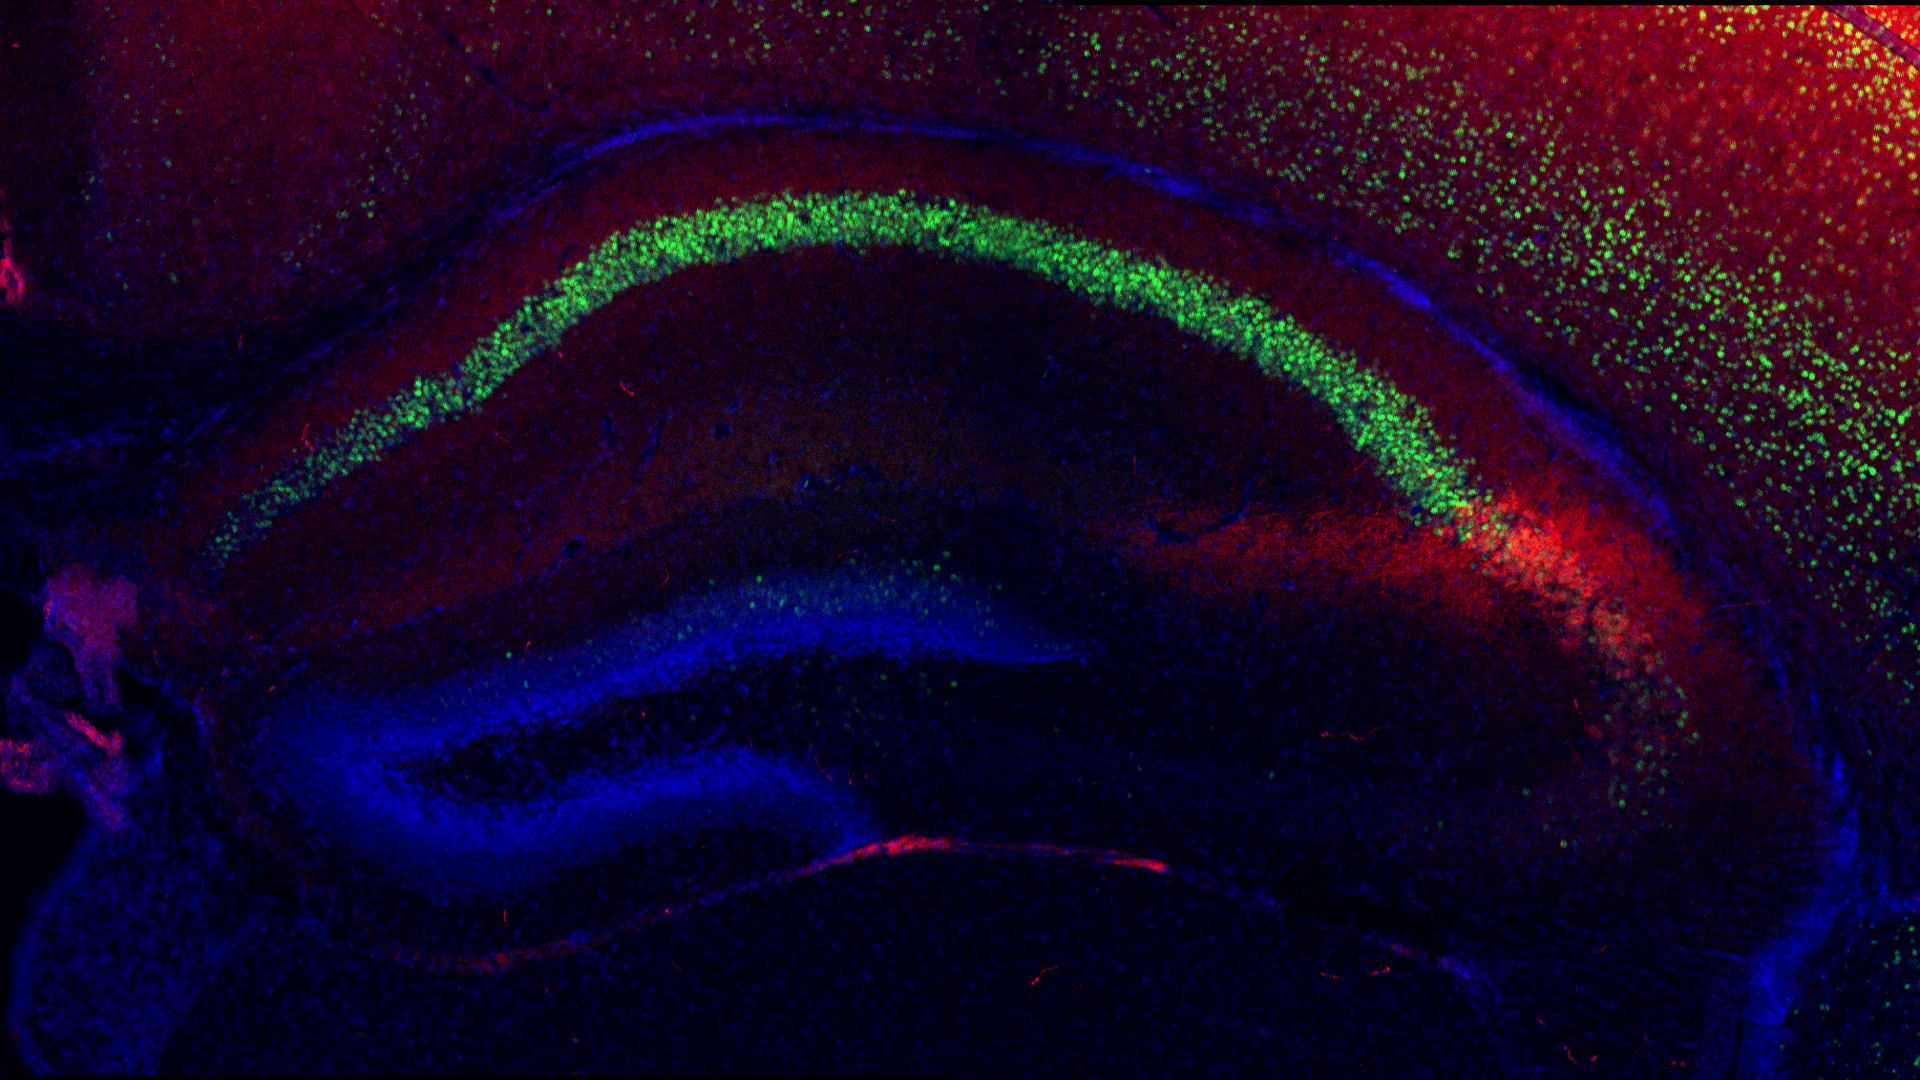 the CA2 region of the hippocampus in a mouse pup